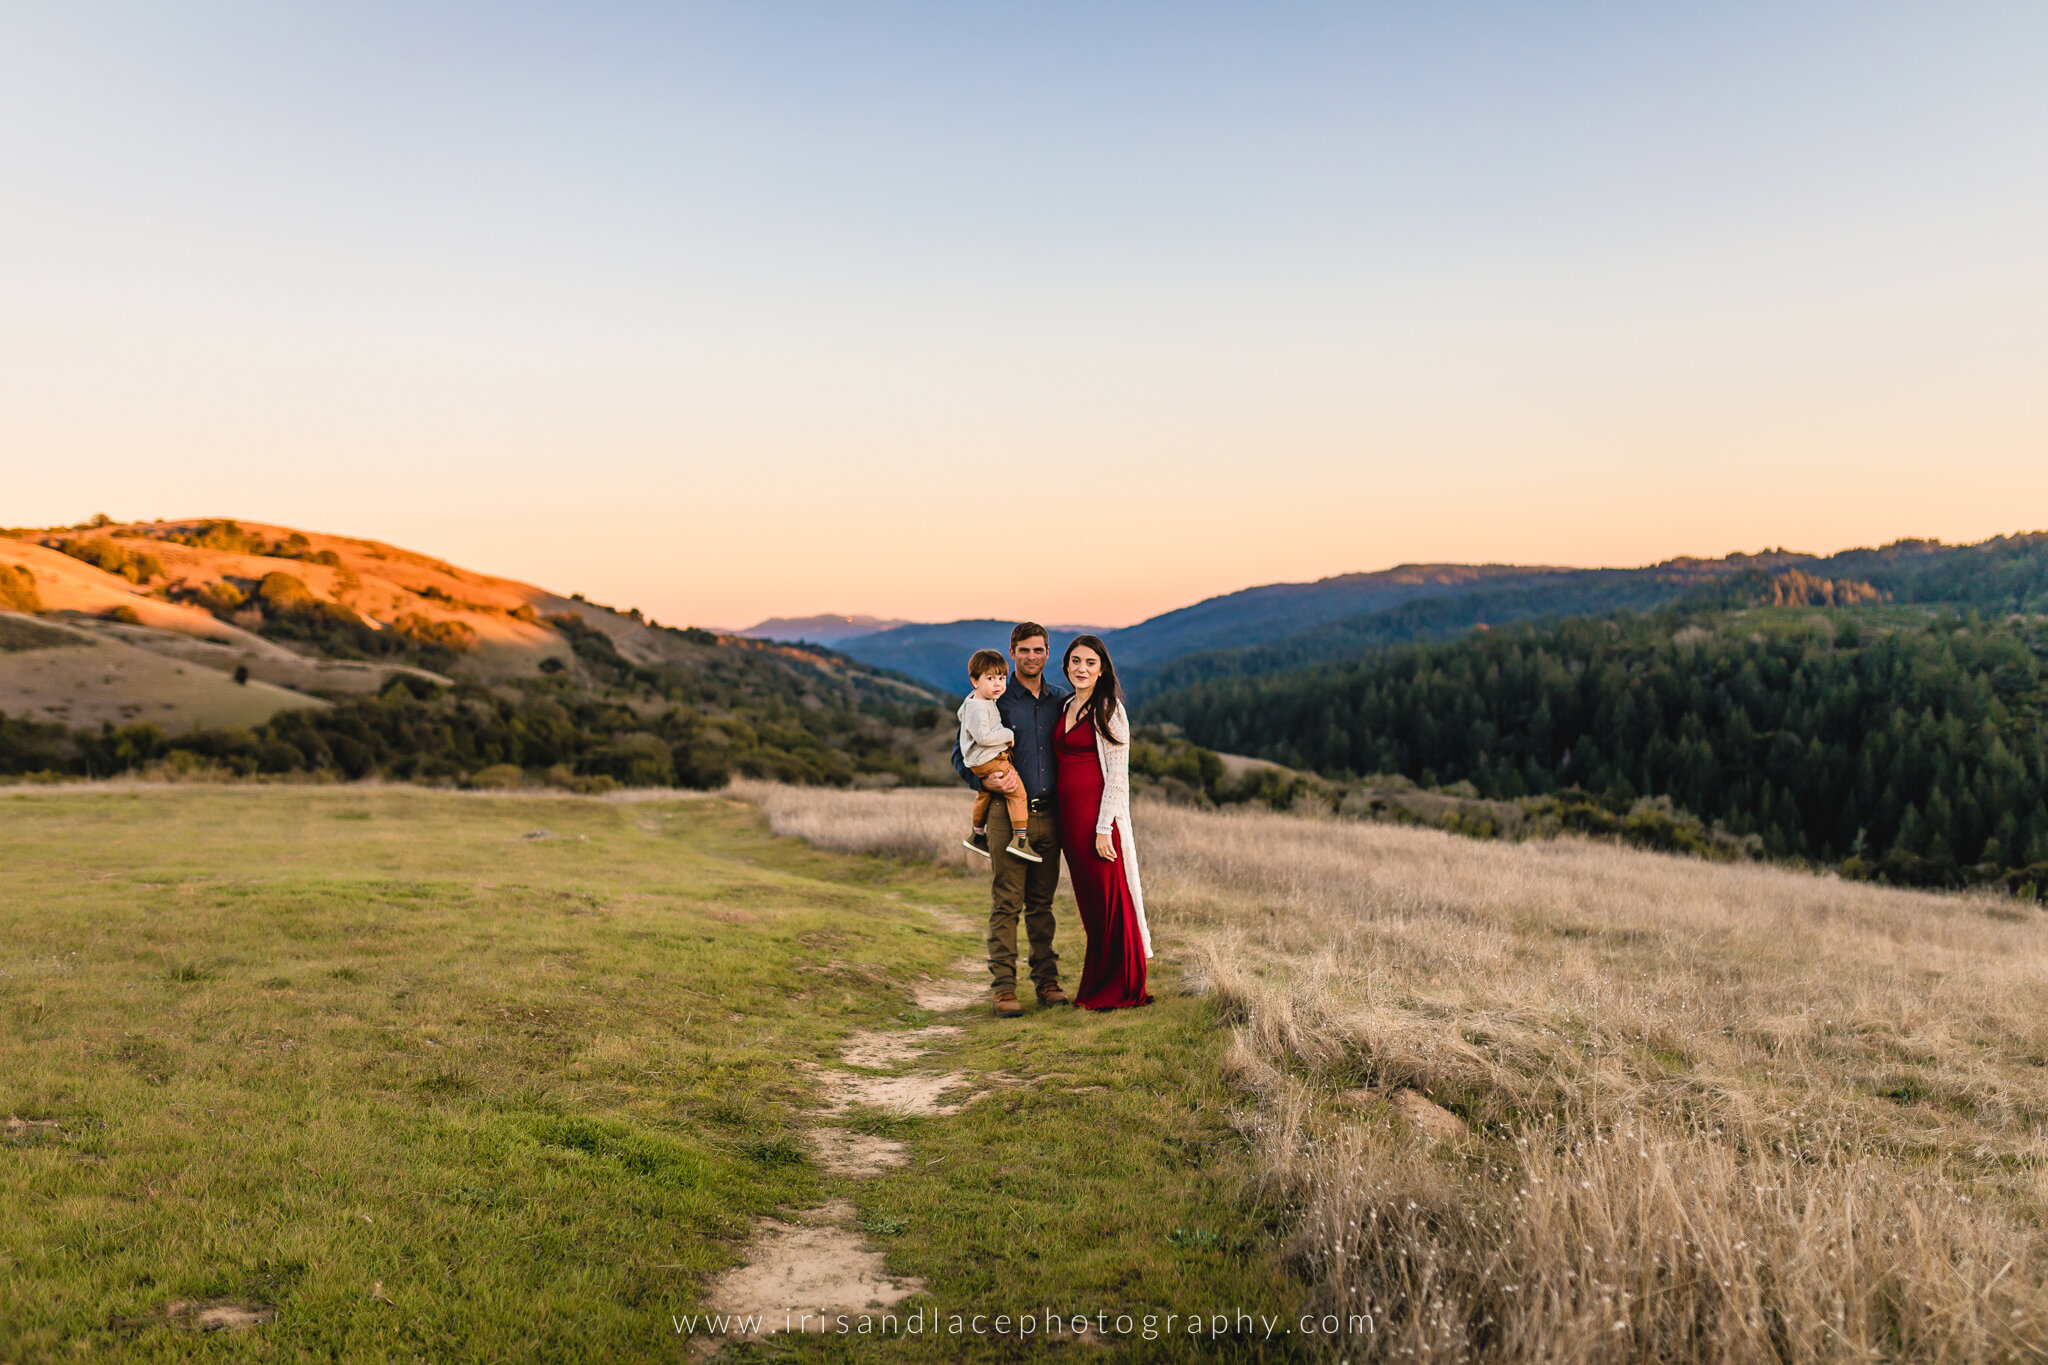 Beautiful Spots for Family Photos in Bay Area  |  SF Bay Area Family Photographer